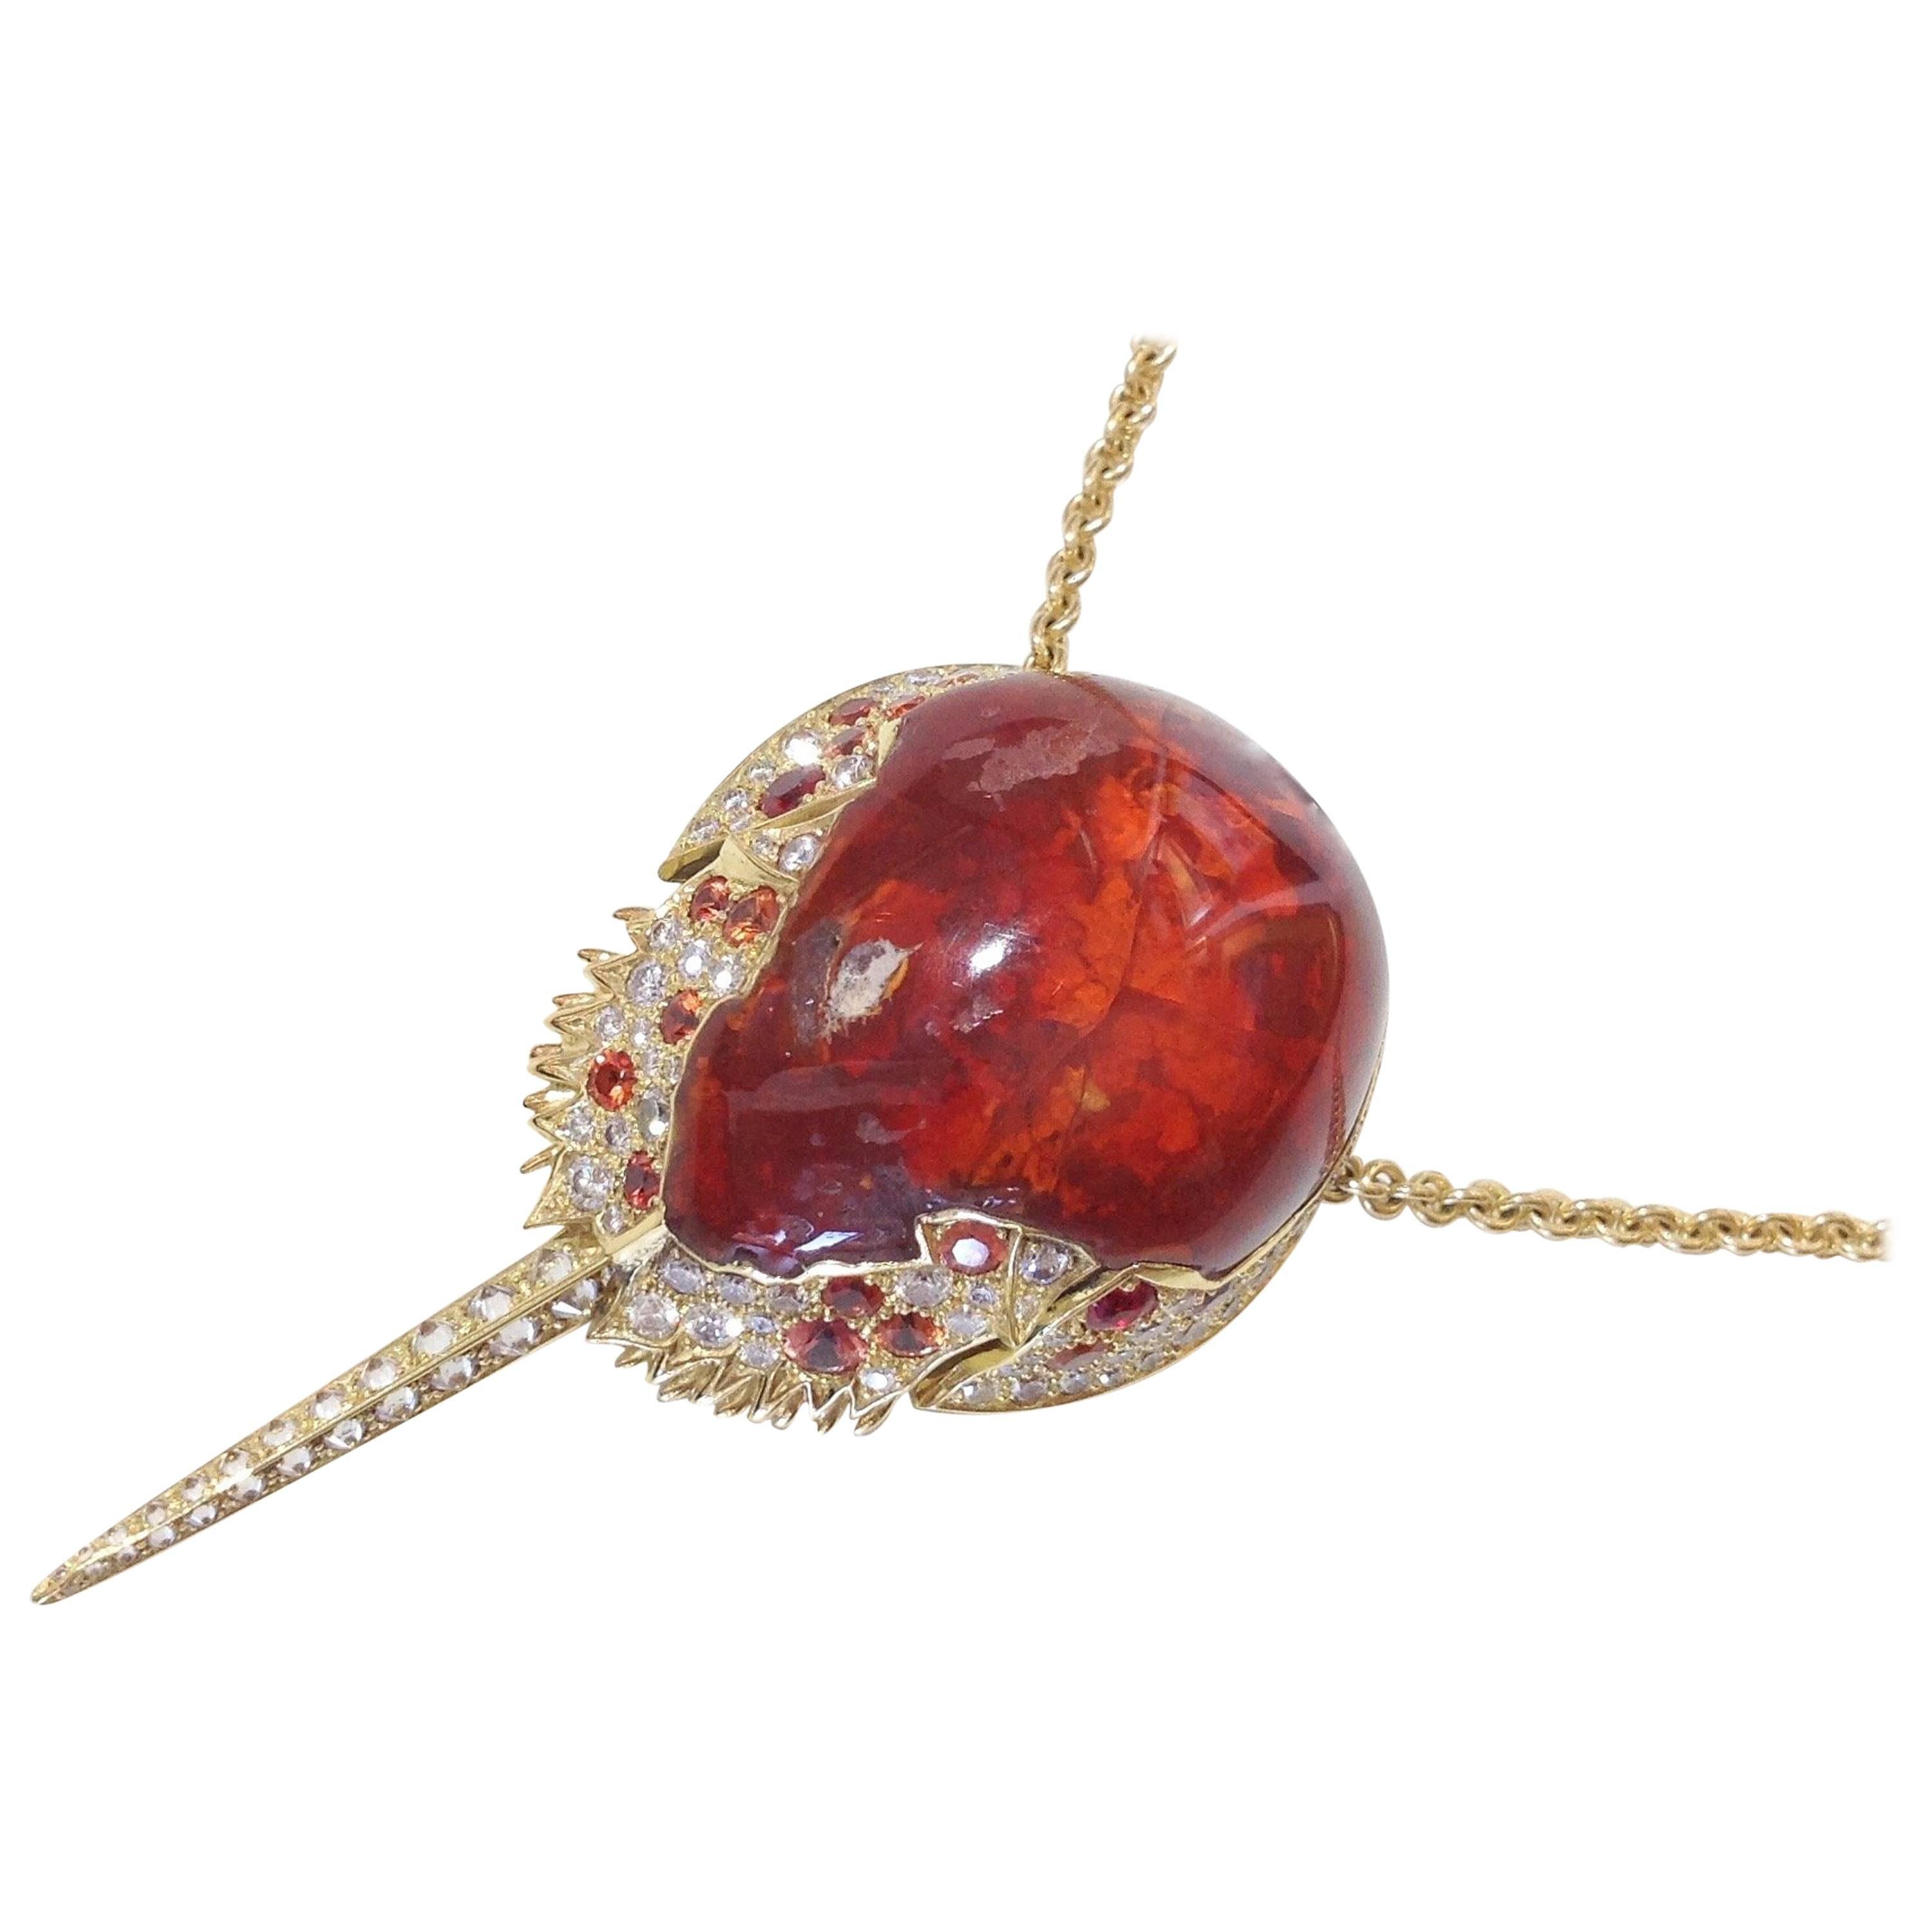 Inspired by the shape of the Mexican Fire Opal, the horseshoe crab necklace was designed using 1.81ct Orange Sapphires and 2.135ct Diamonds. Boasting strength and graceful antiquity, this one-of-a-kind pendant elegantly hangs from a 28 inch 18kt